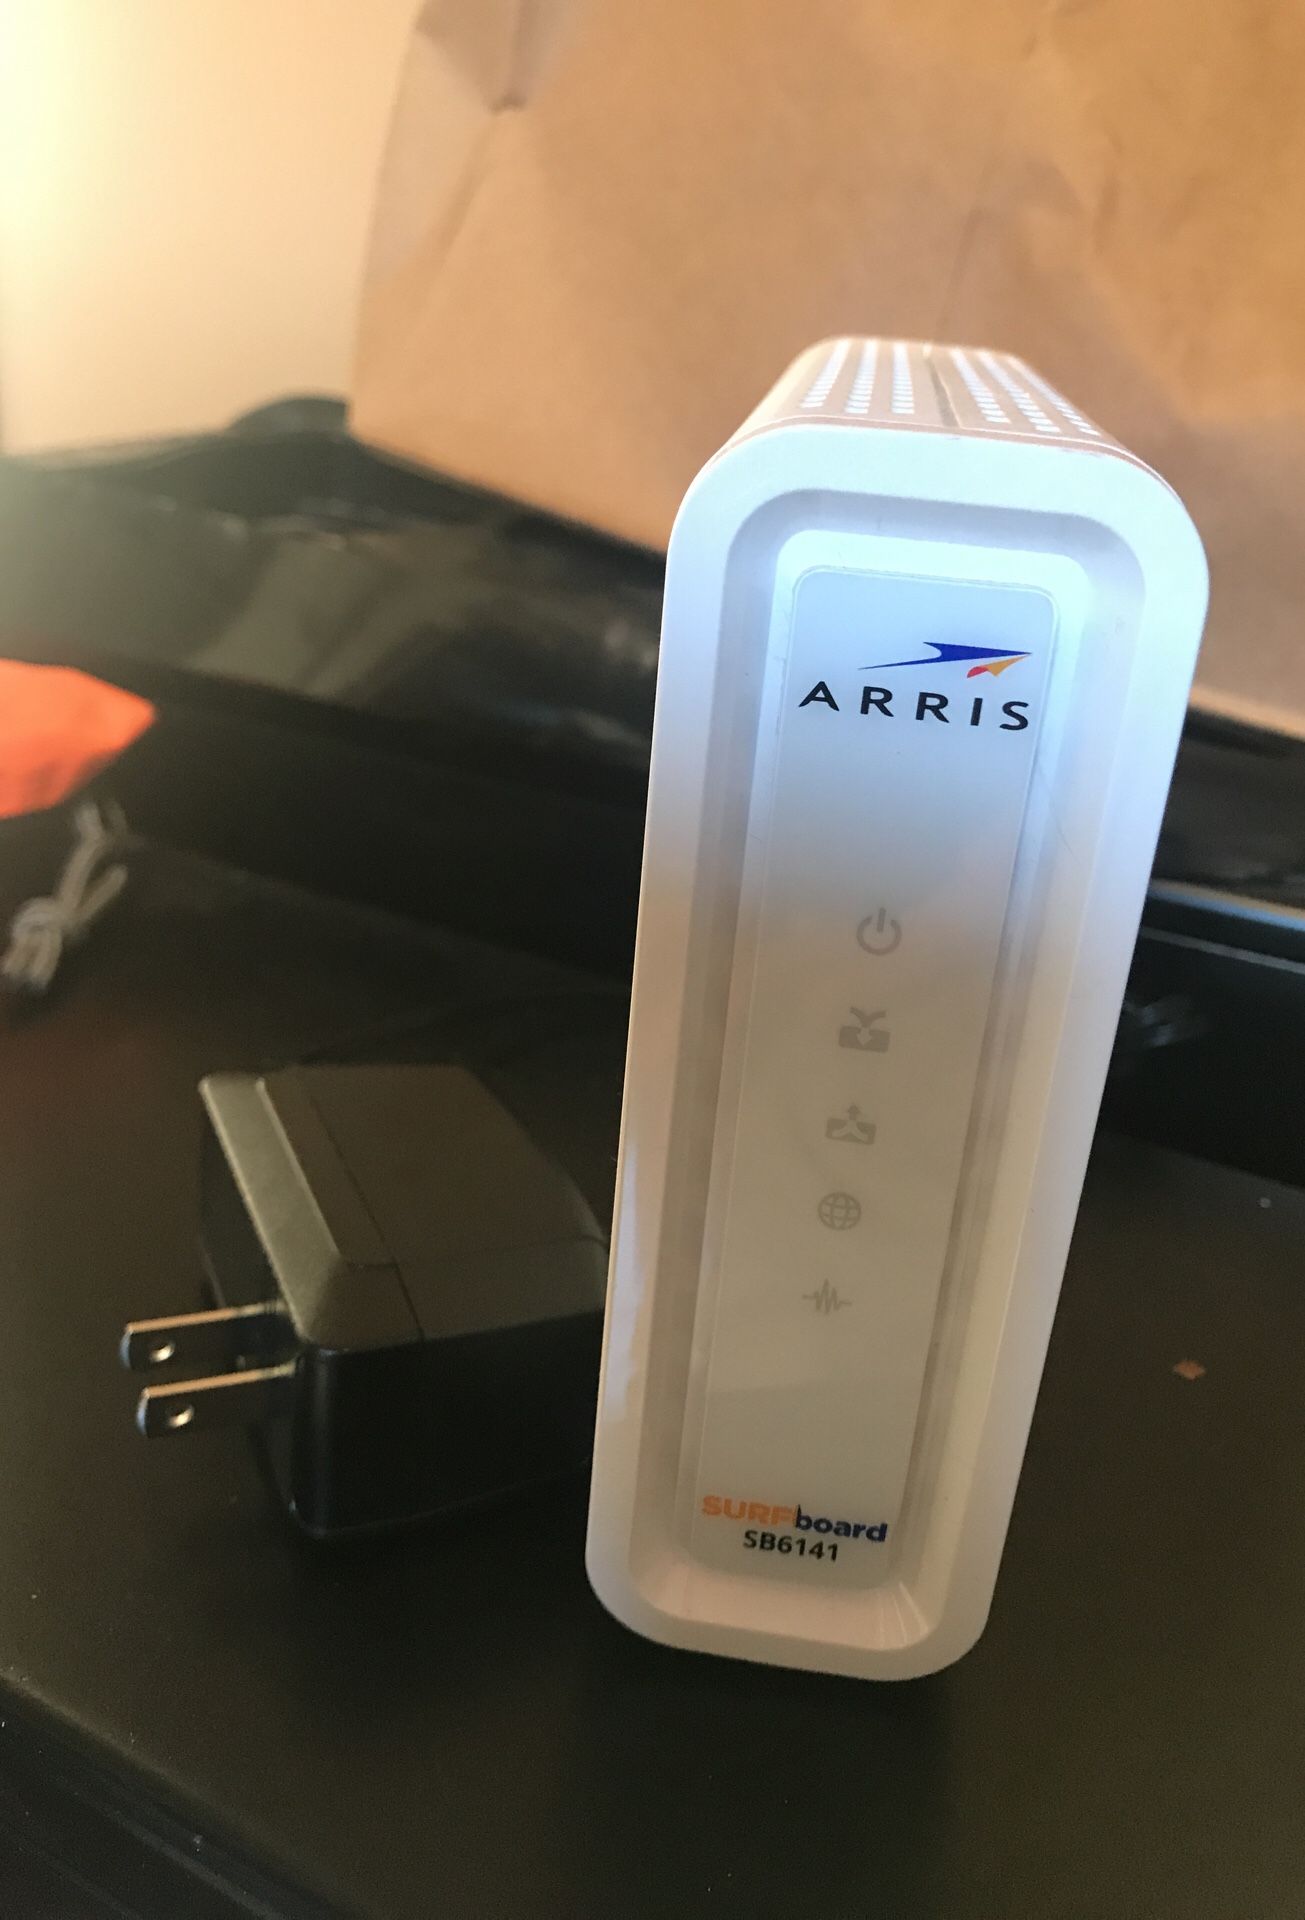 ARRIS SB6141, less than a year old and working!